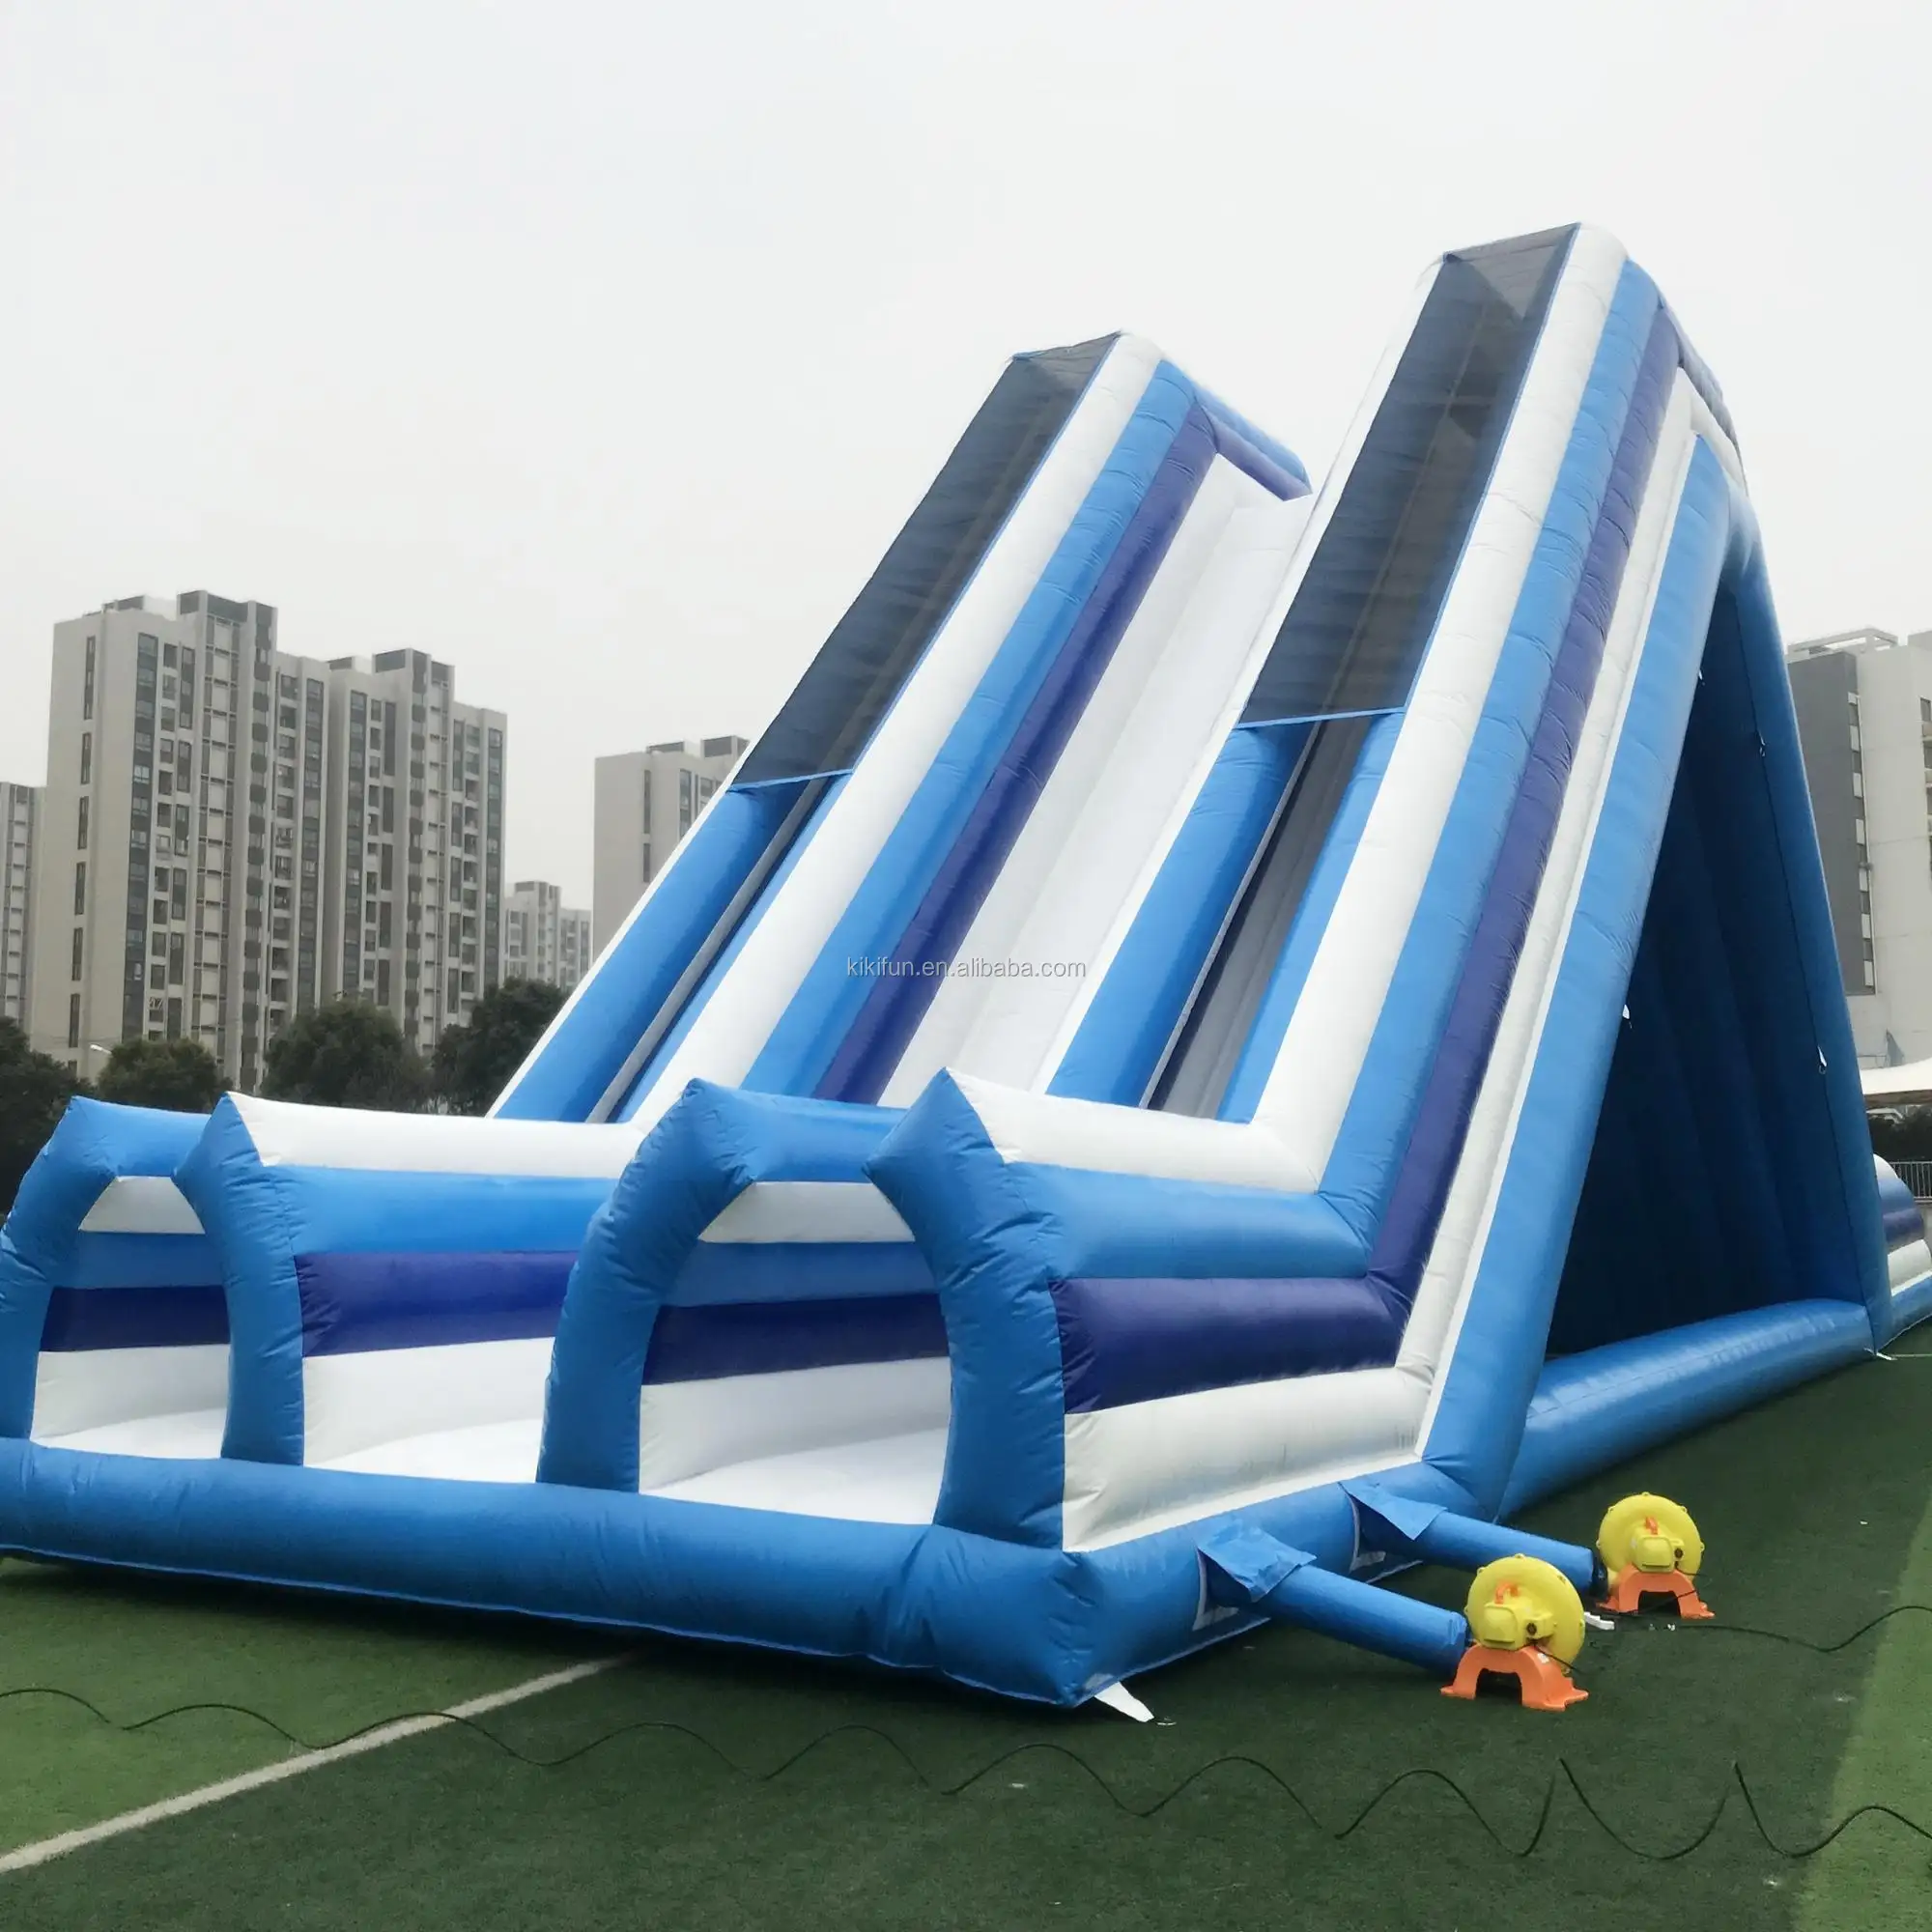 Factory price long blue inflatable water slide for adults and kids